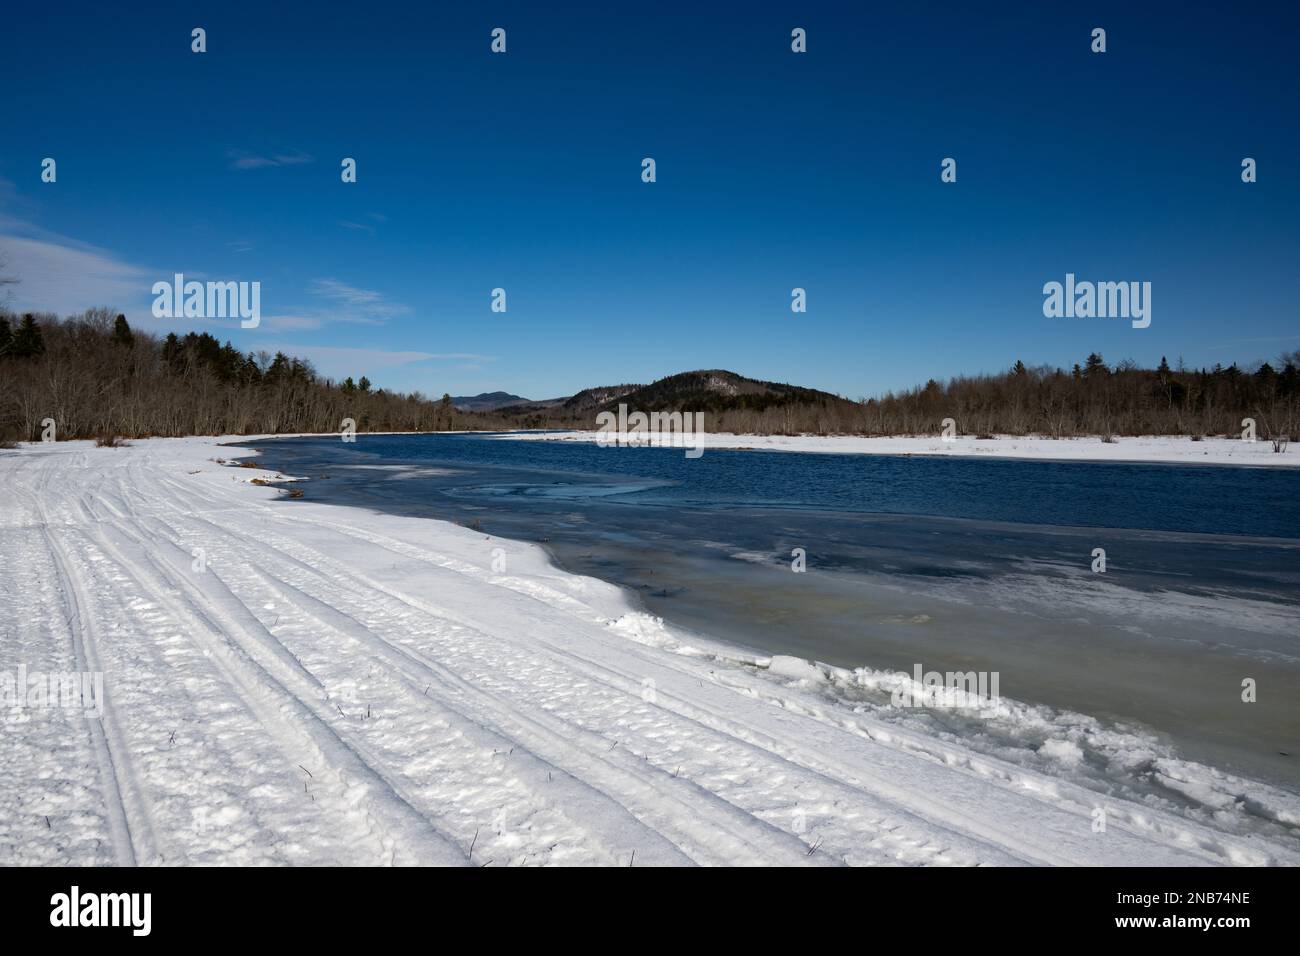 A winter view of the Adirondack Mountains from a snowmobile trail along the Sacandaga River near Speculator, NY Stock Photo